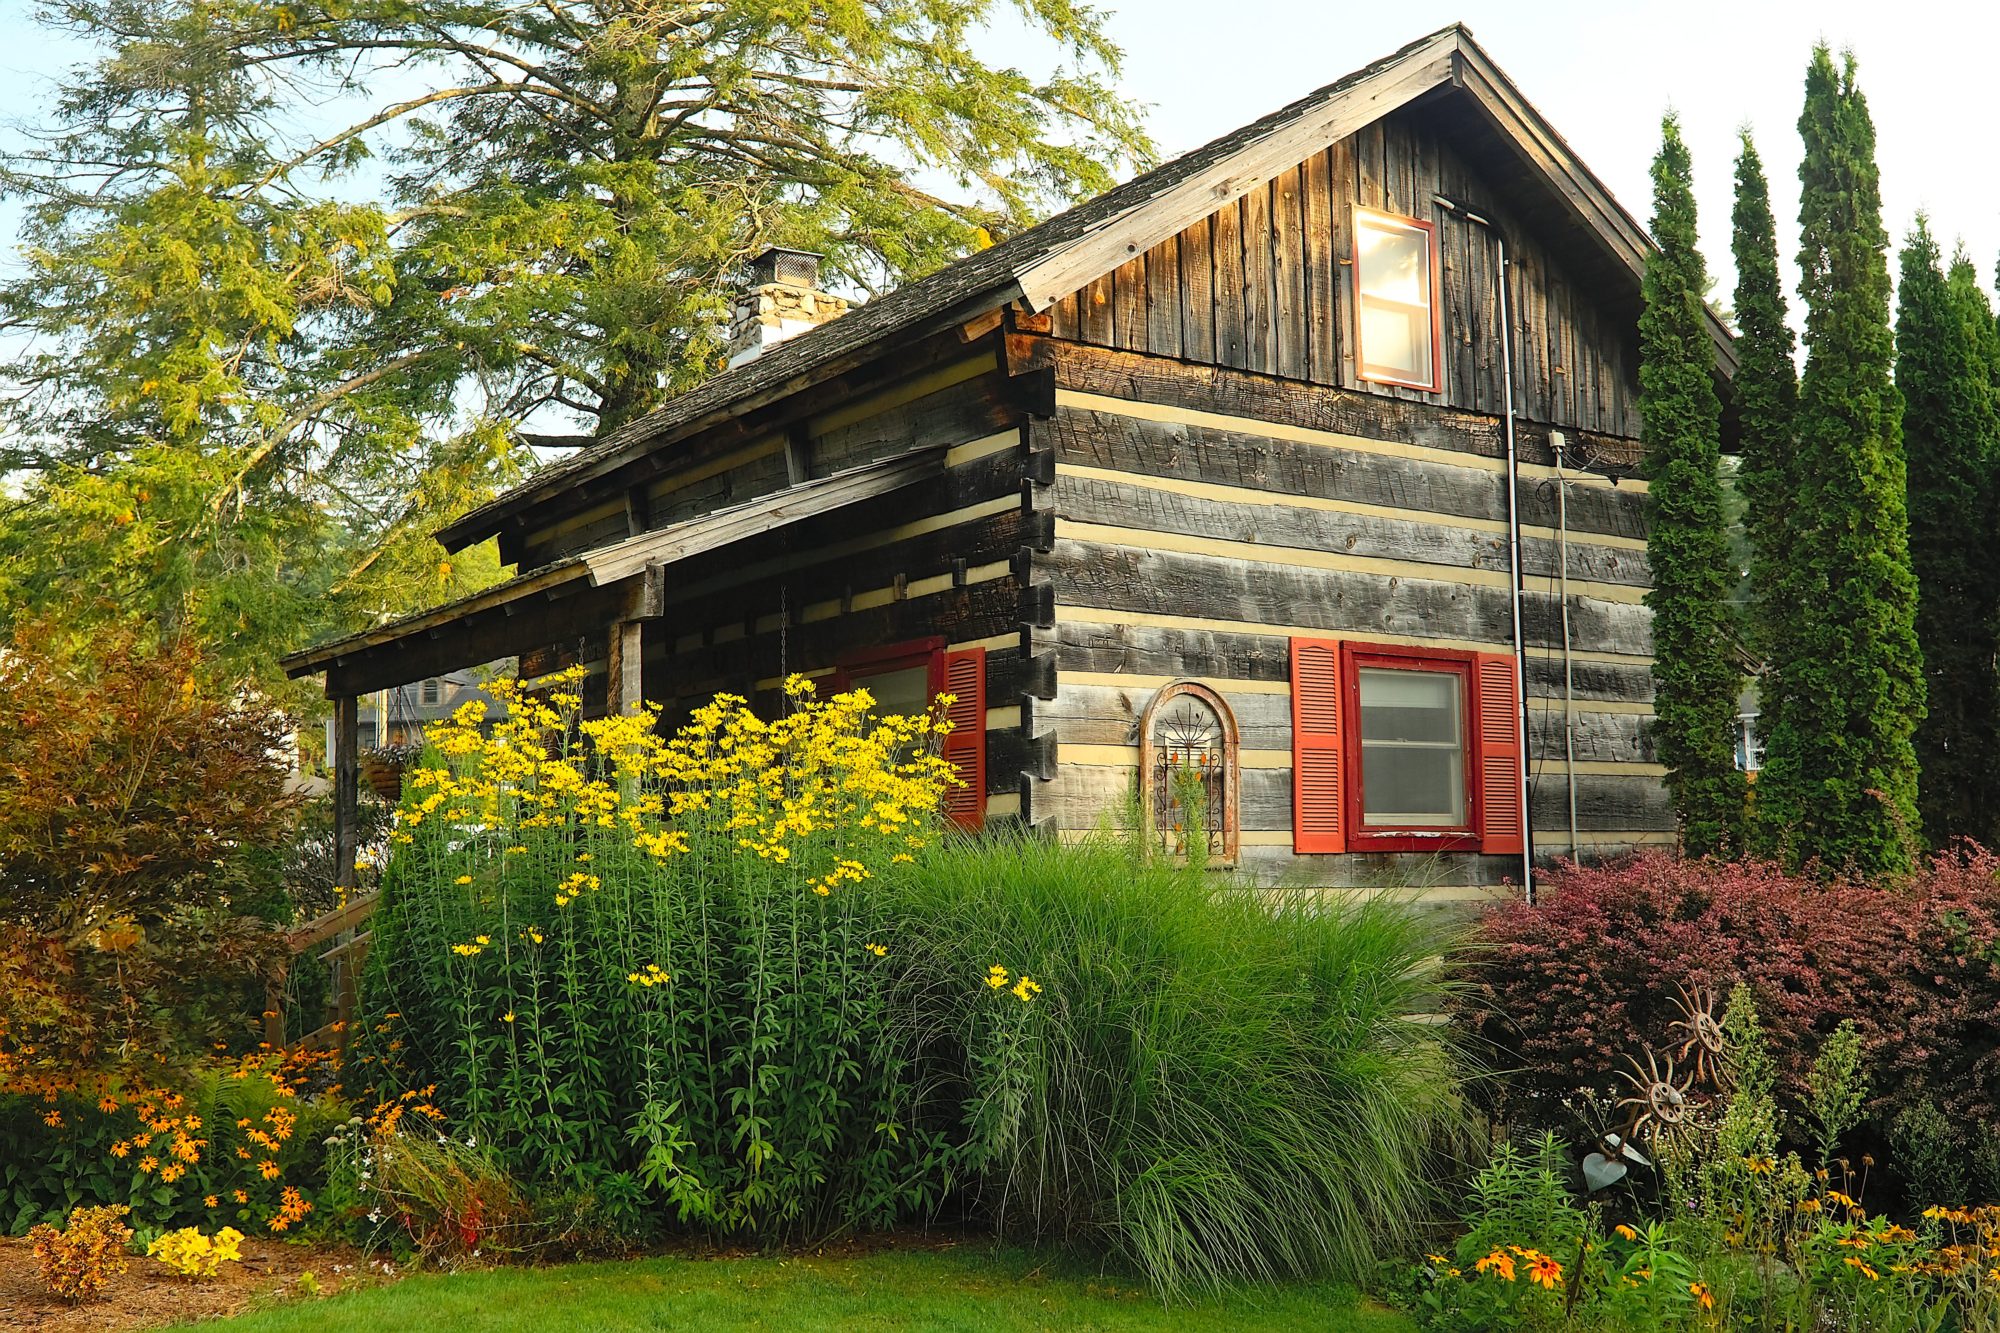 A log cabin surrounded by plants and flowers